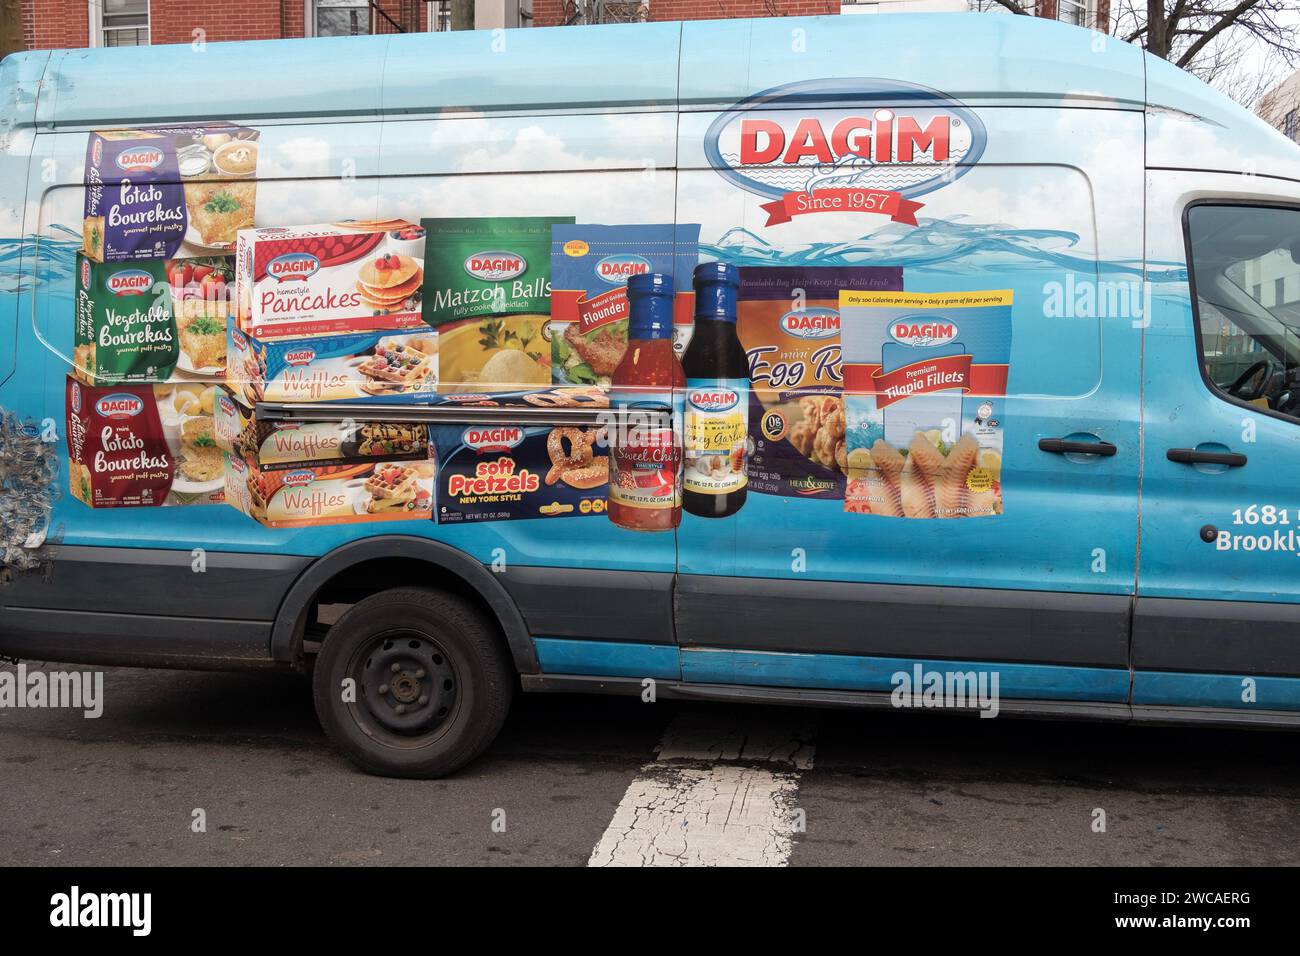 A delivery truck from Dagim a company that sells kosher food, primarily frozen fish. Delivering here to  supermarket in Williamsburg, Brooklyn. Stock Photo